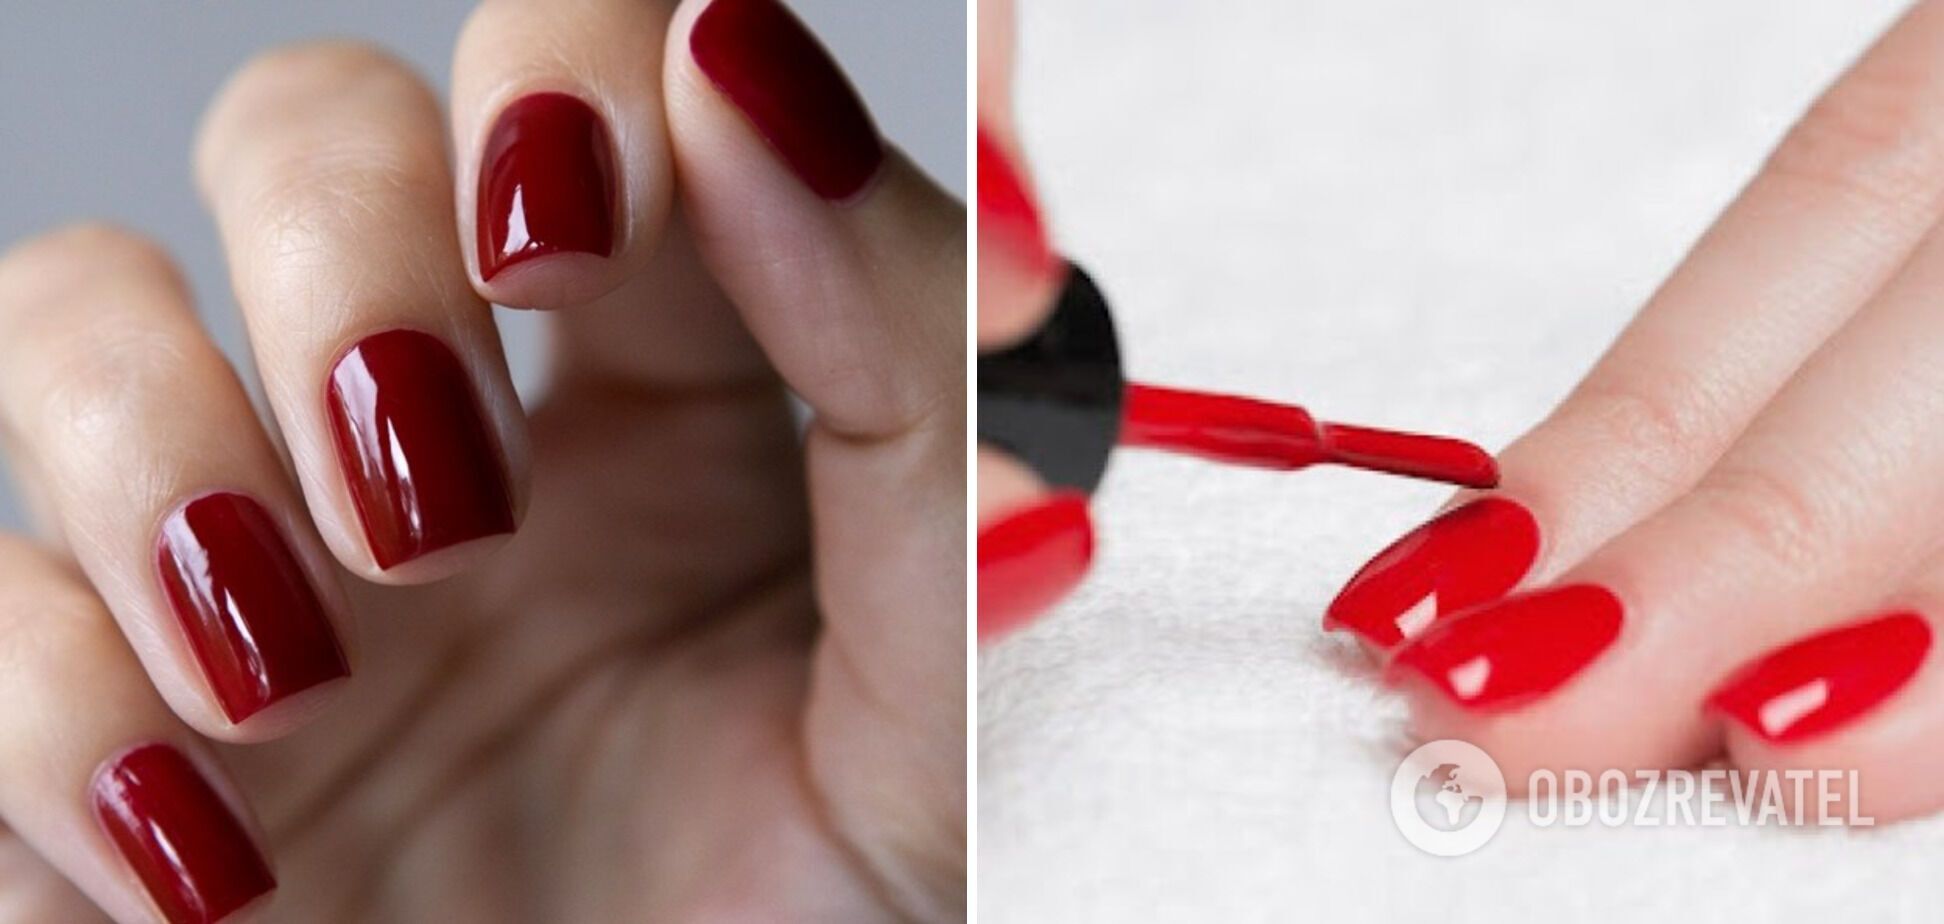 What colors of nail polish to choose to make hands look younger: the secret is revealed. Photo